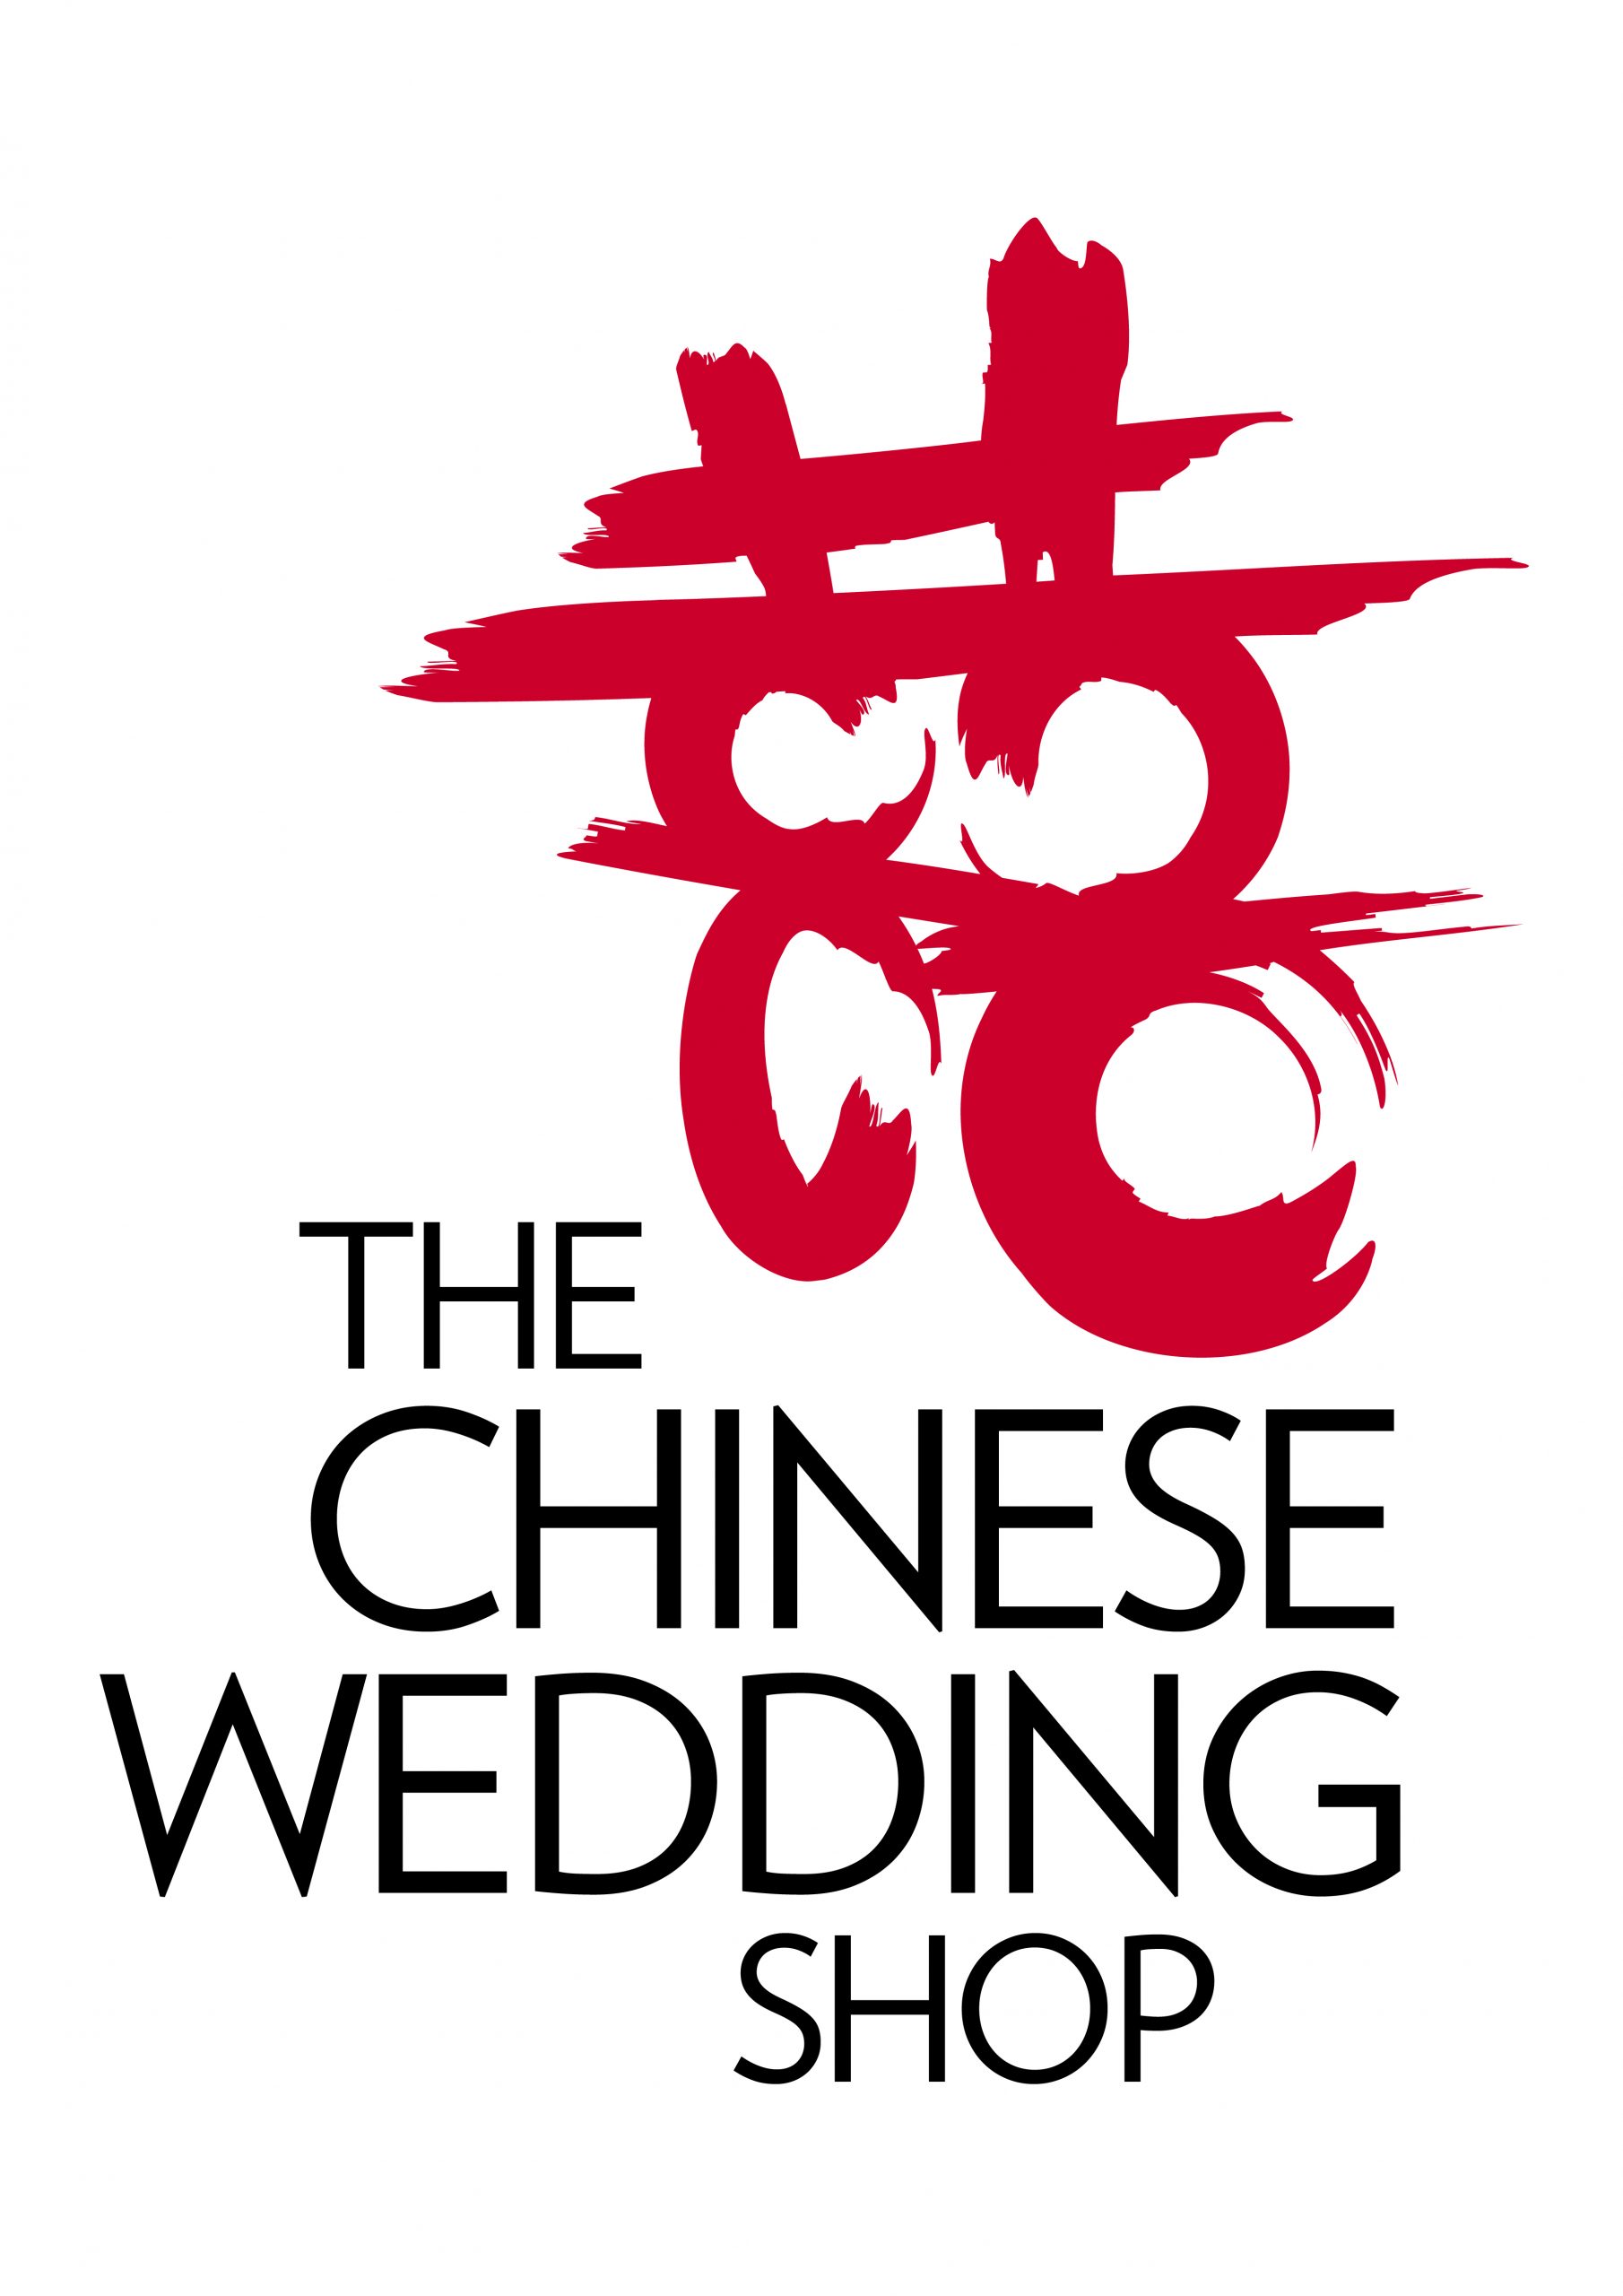 The Chinese Wedding Shop